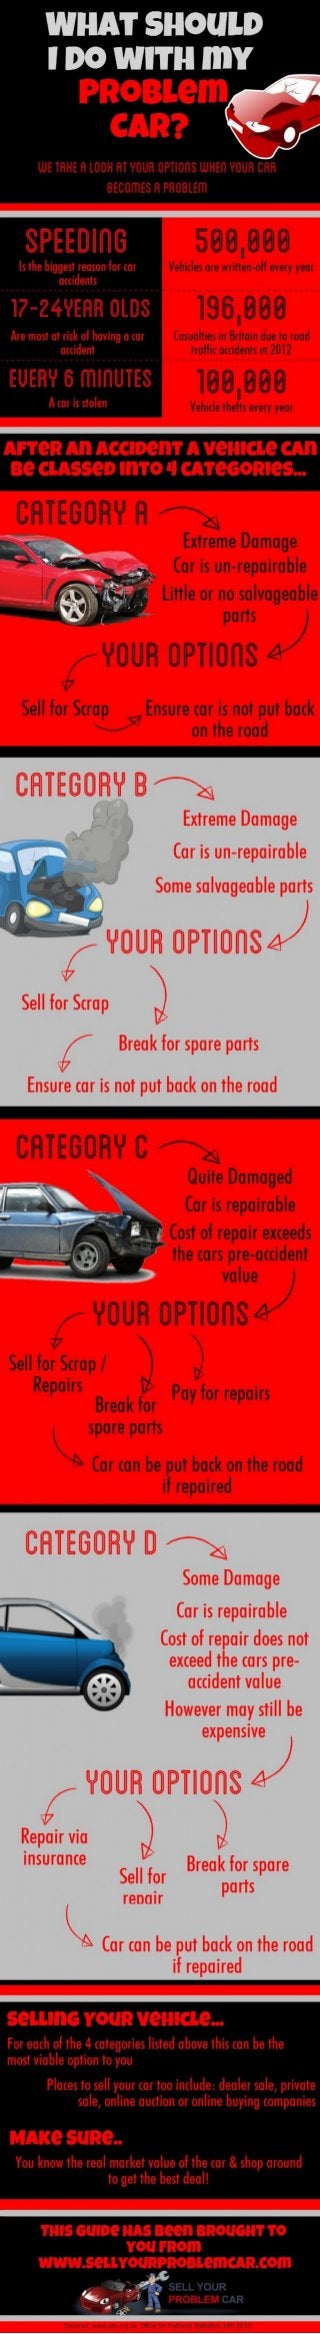 4 Ways To Sell Your Faulty Car